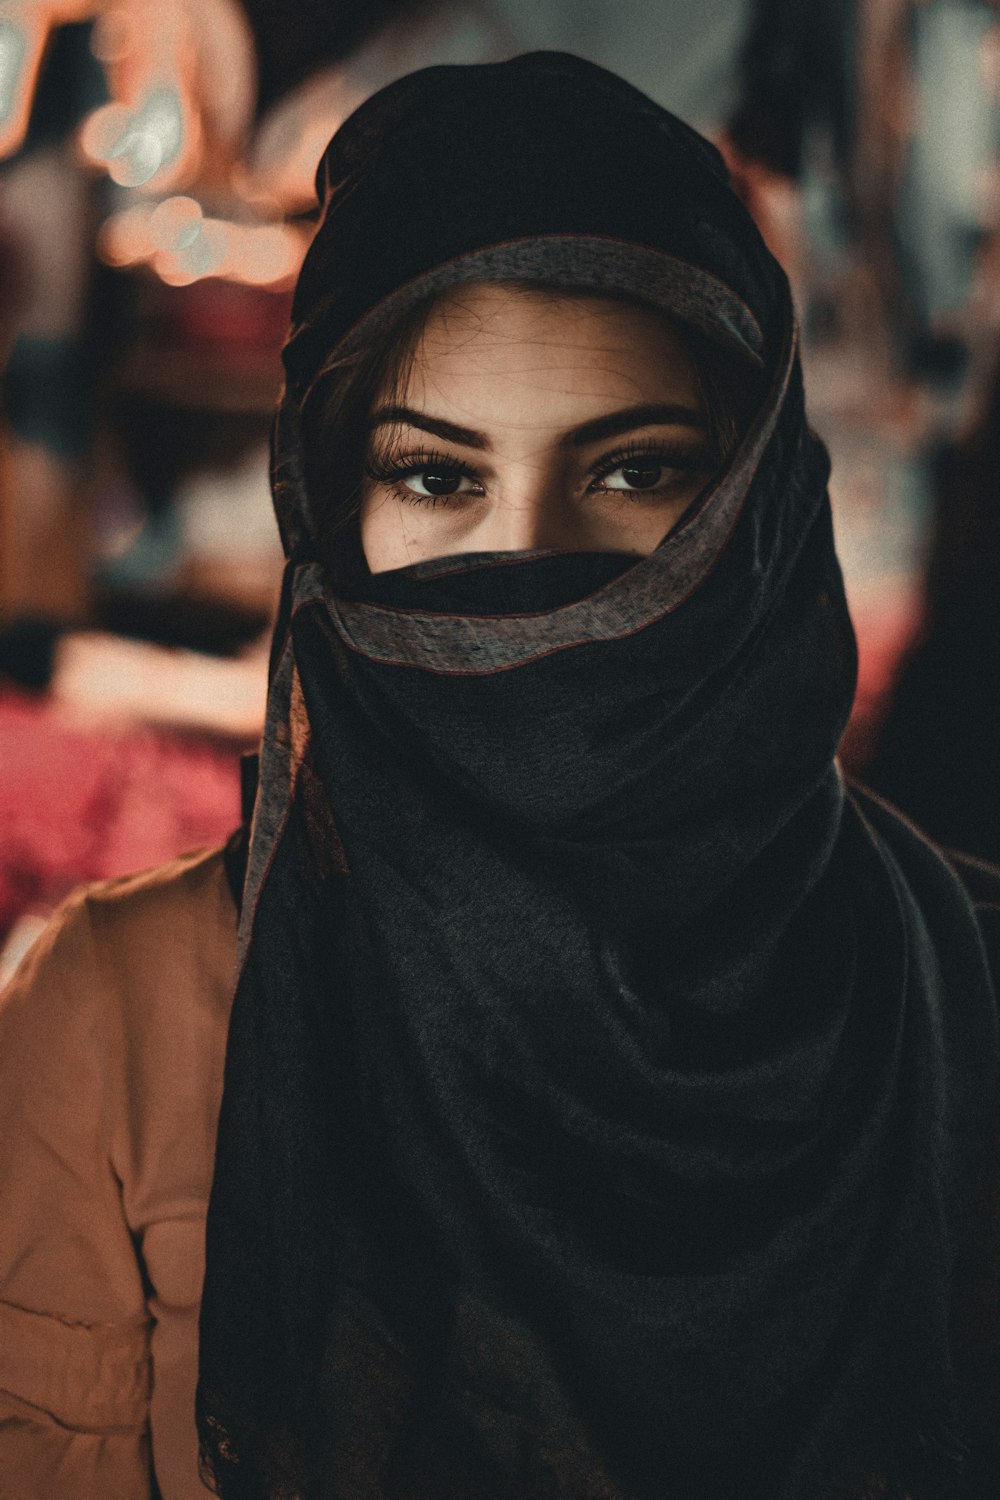 Hijab profile picture,islamic girl profile pic - Photo #1656 - PNG Wala -  Photo And PNG 100% Free Stock Images